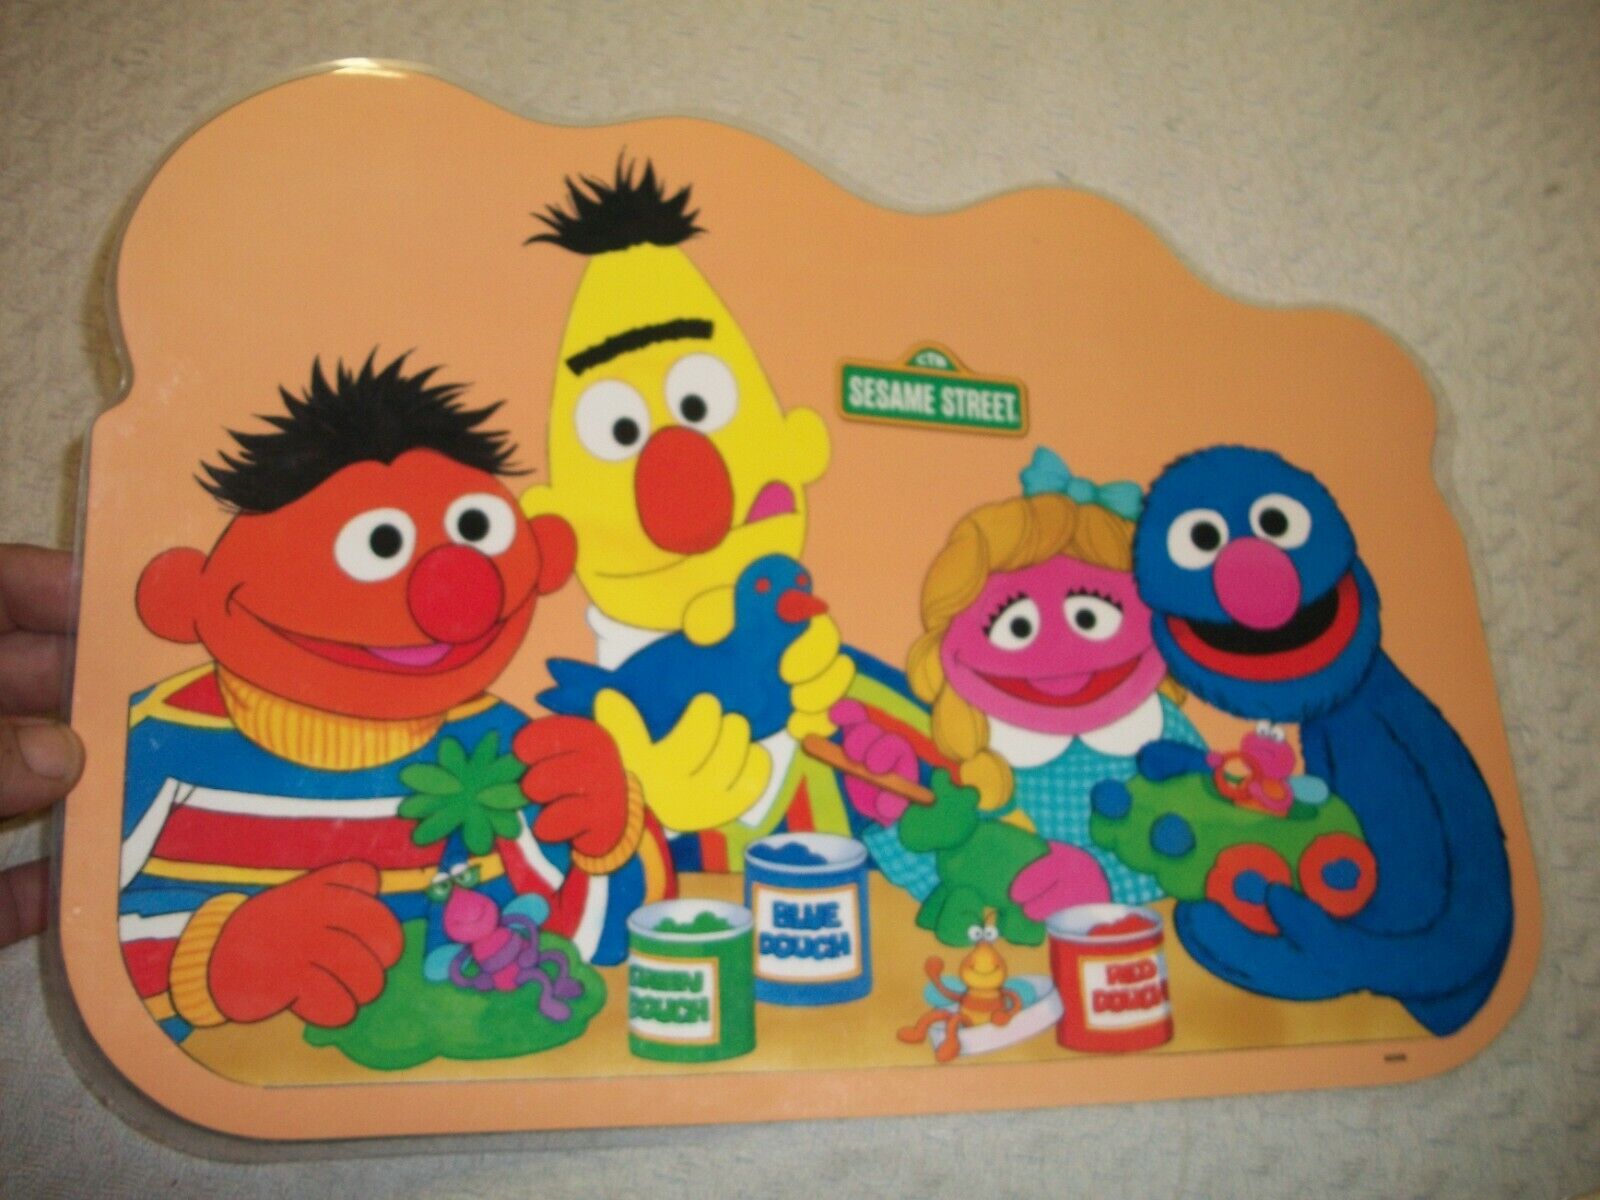 Vintage Sesame Street ~ Playtime Placemat ~ Double-Sided ~ 17 1/2